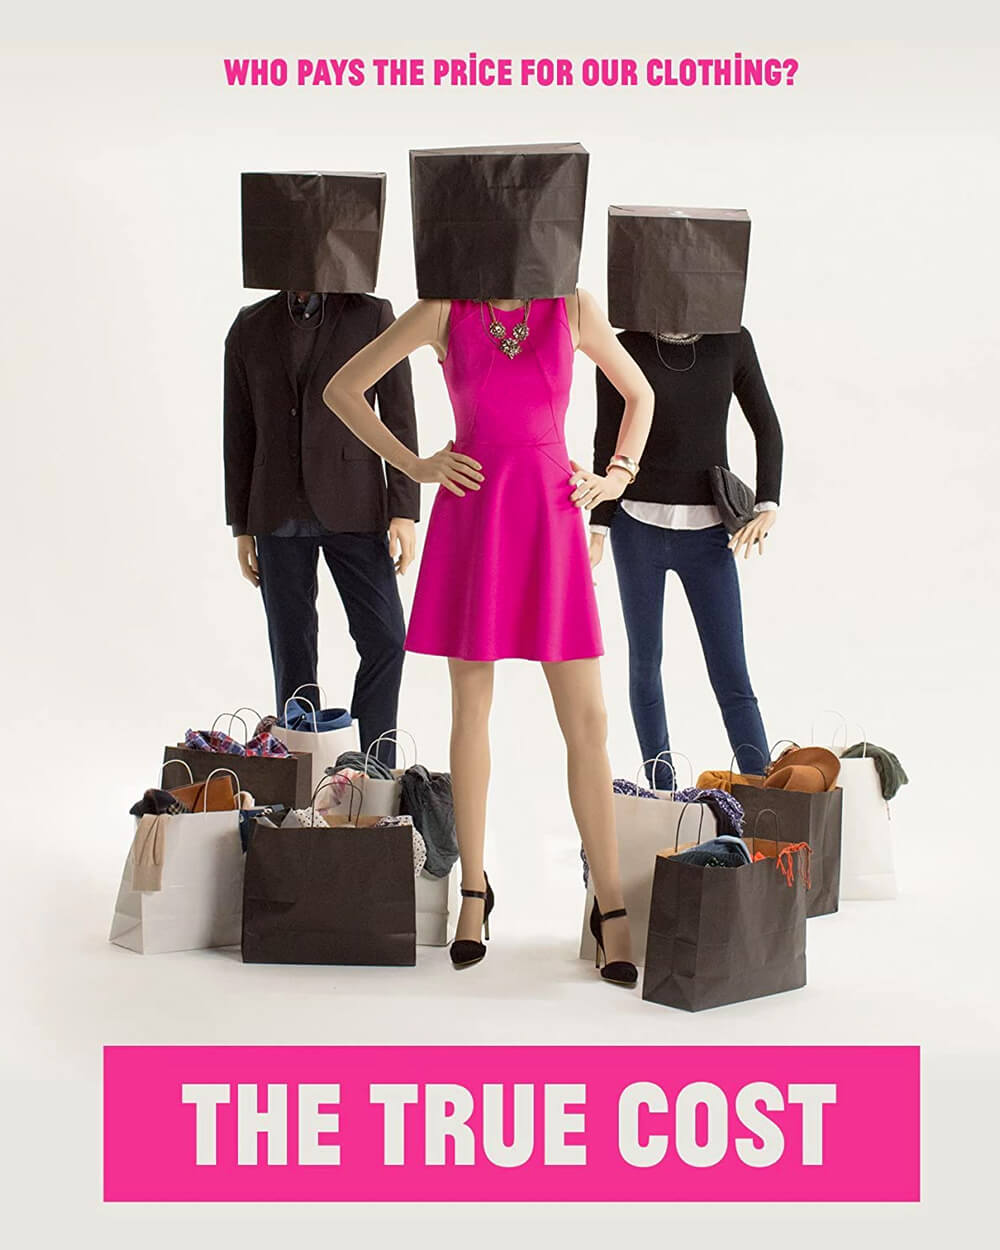 The True Cost documentary about sustainable fashion